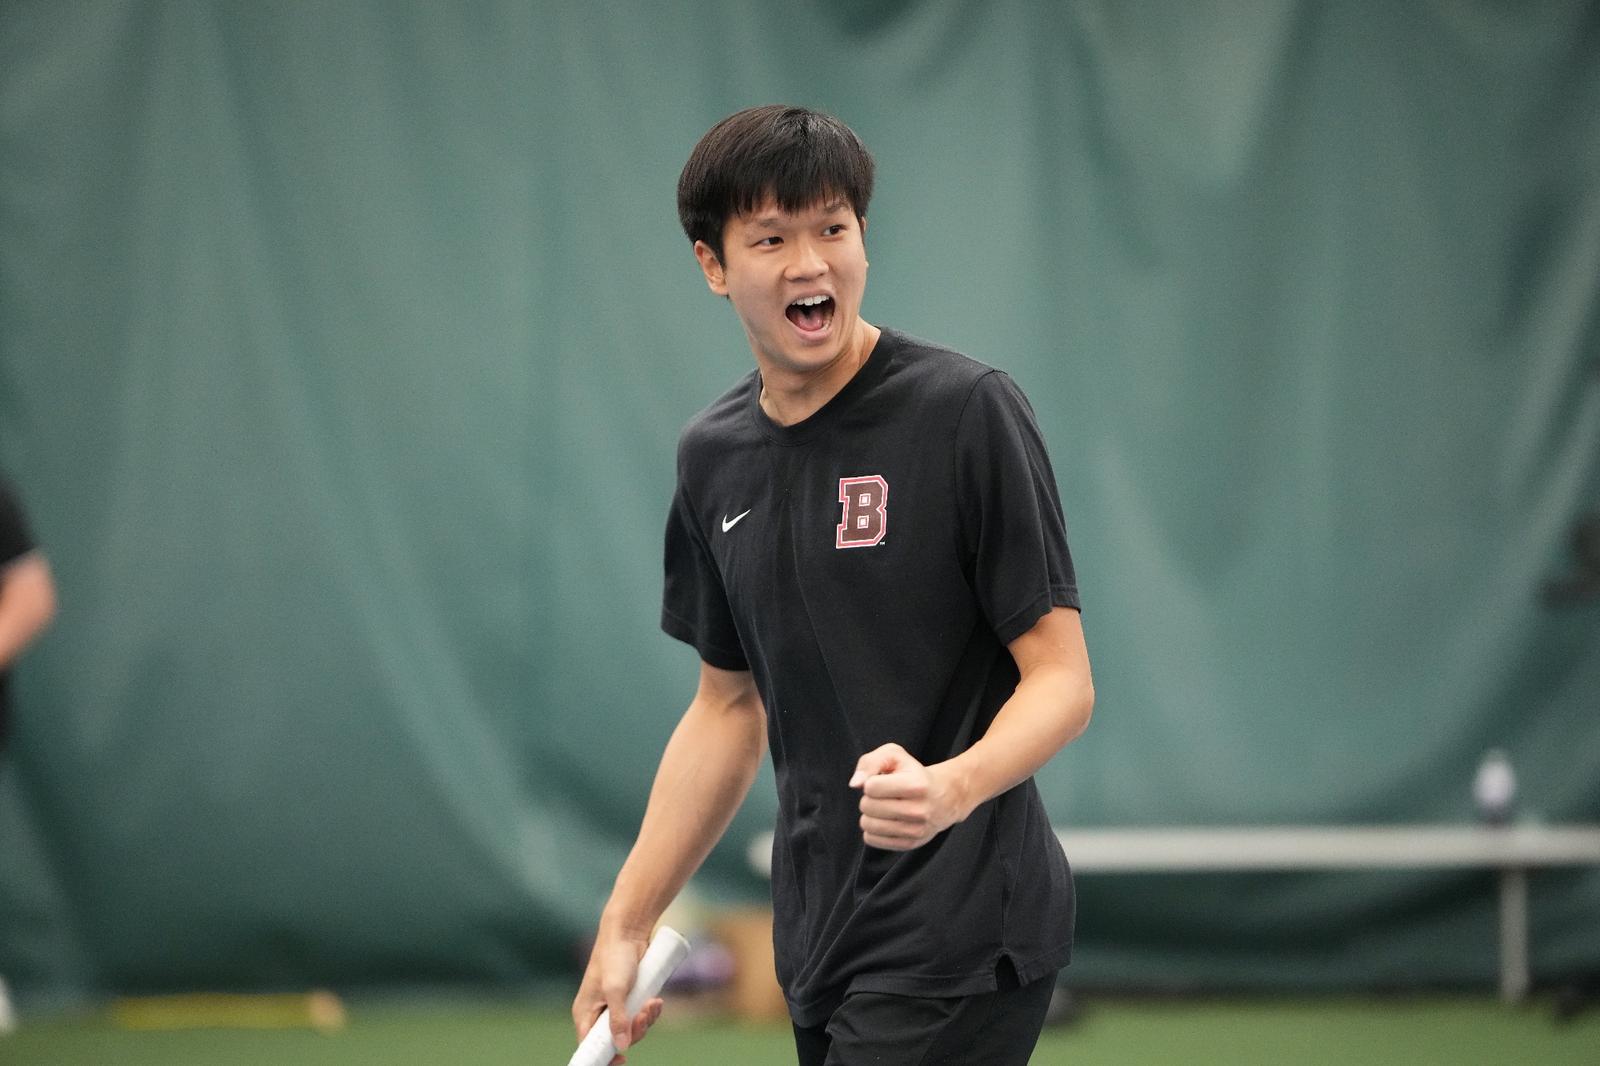 Lam Named to Academic All-Ivy Team